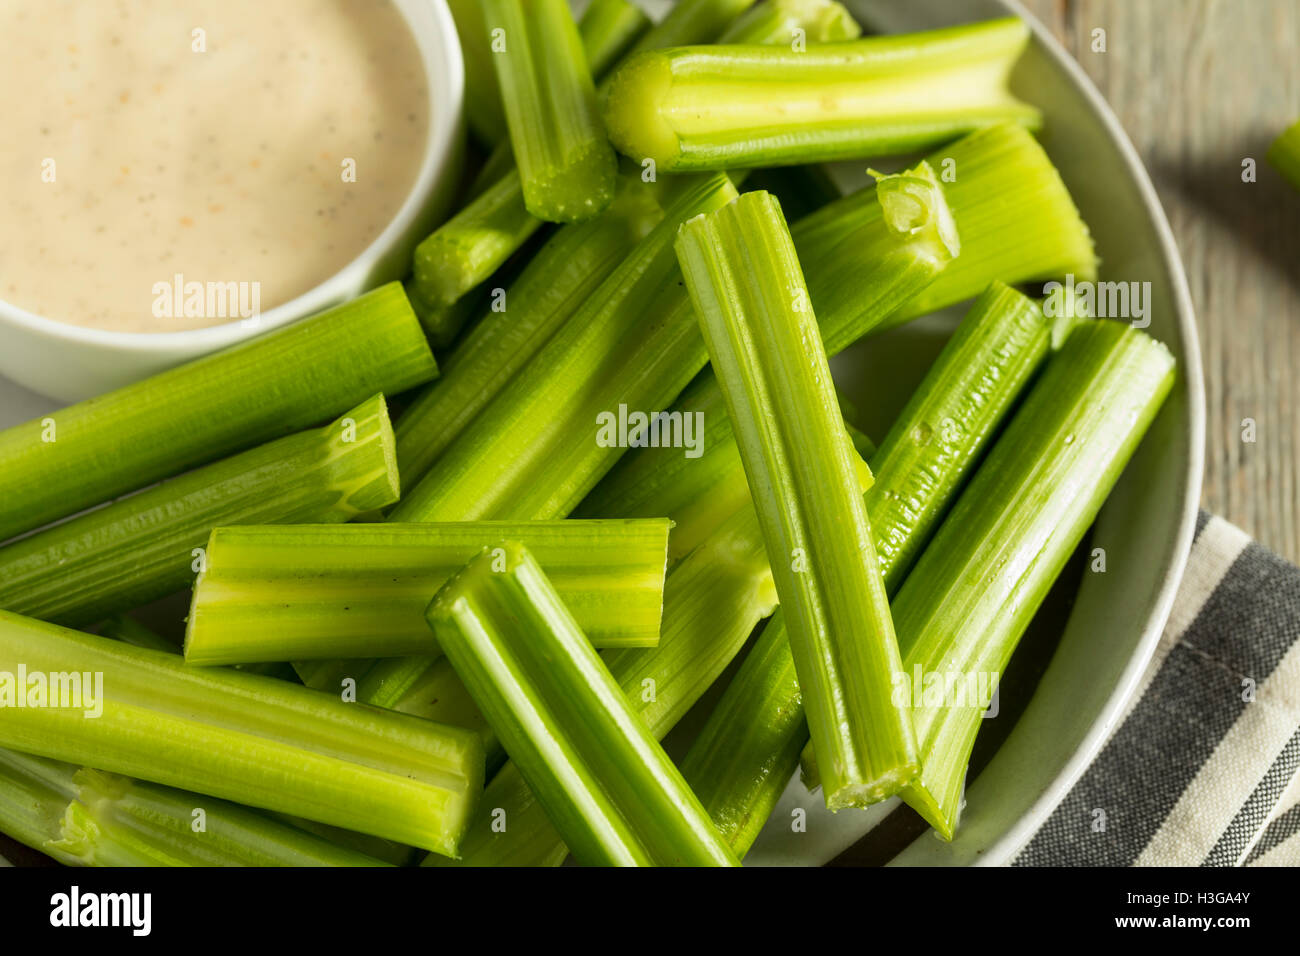 Raw Organic Green Celery Stalks with Ranch Dip Stock Photo